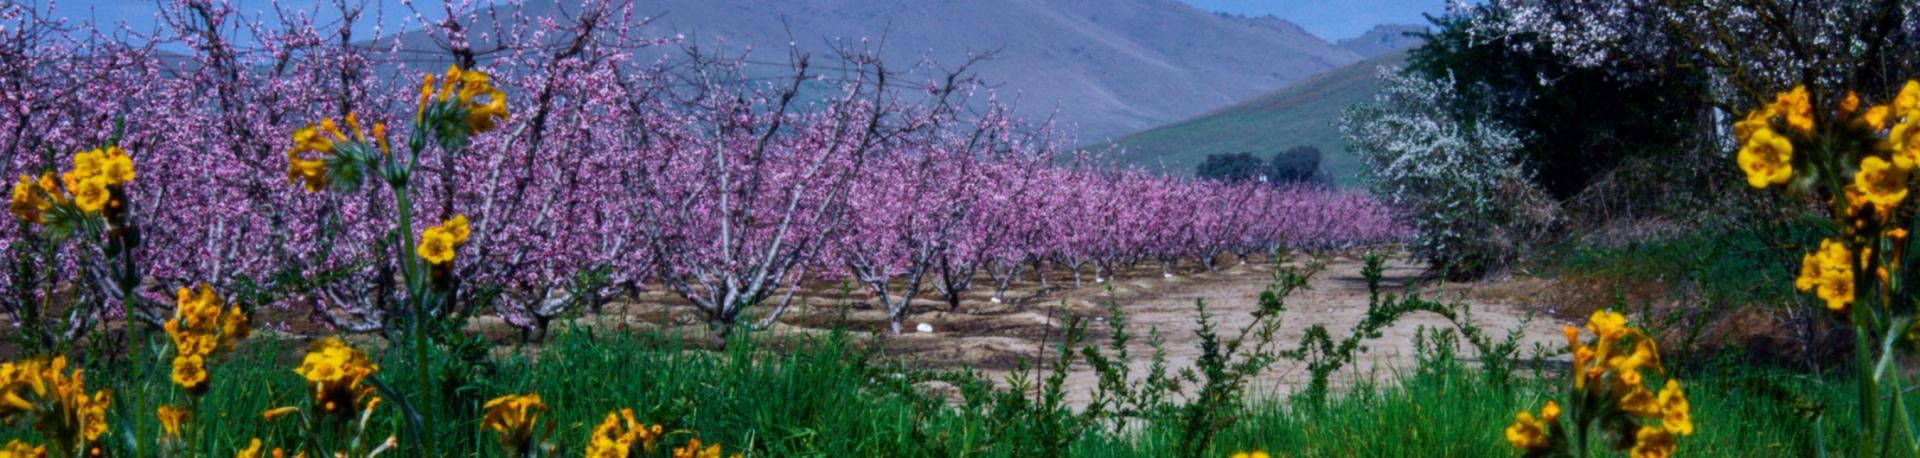 Almond Flower field with mountains in the back